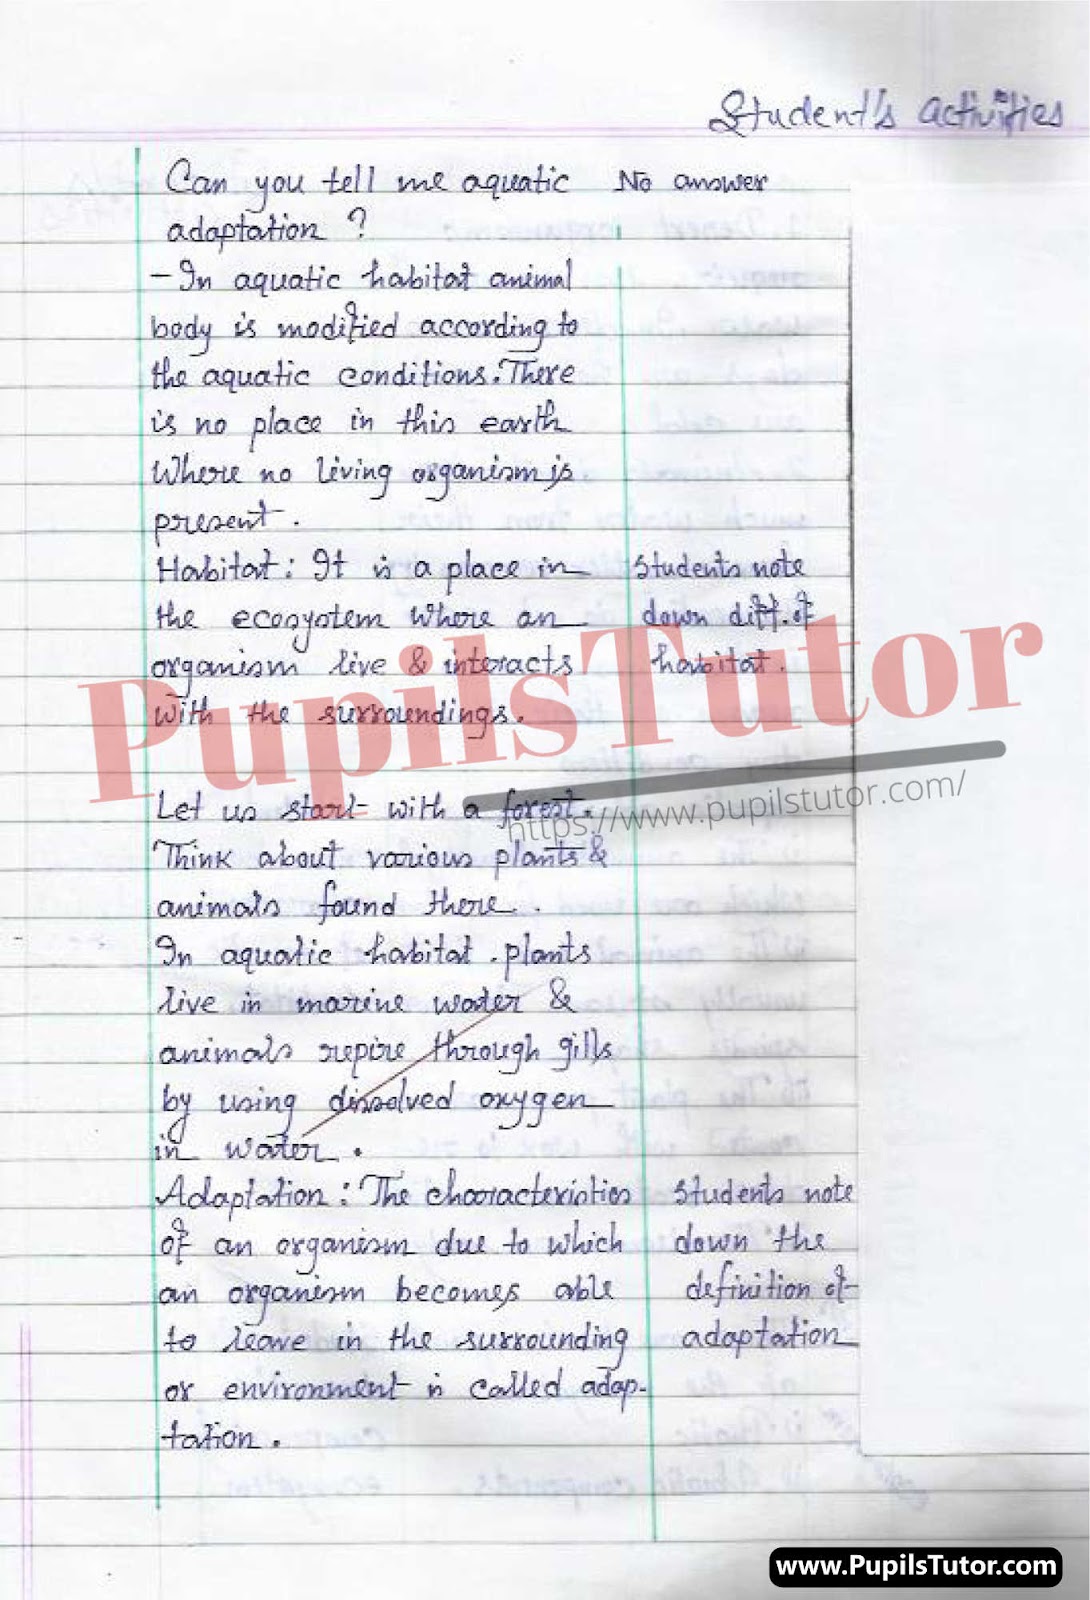 General And Biological Science Lesson Plan On Living Things For Class/Grade 5 and 6 For CBSE NCERT School And College Teachers  – (Page And Image Number 3) – www.pupilstutor.com